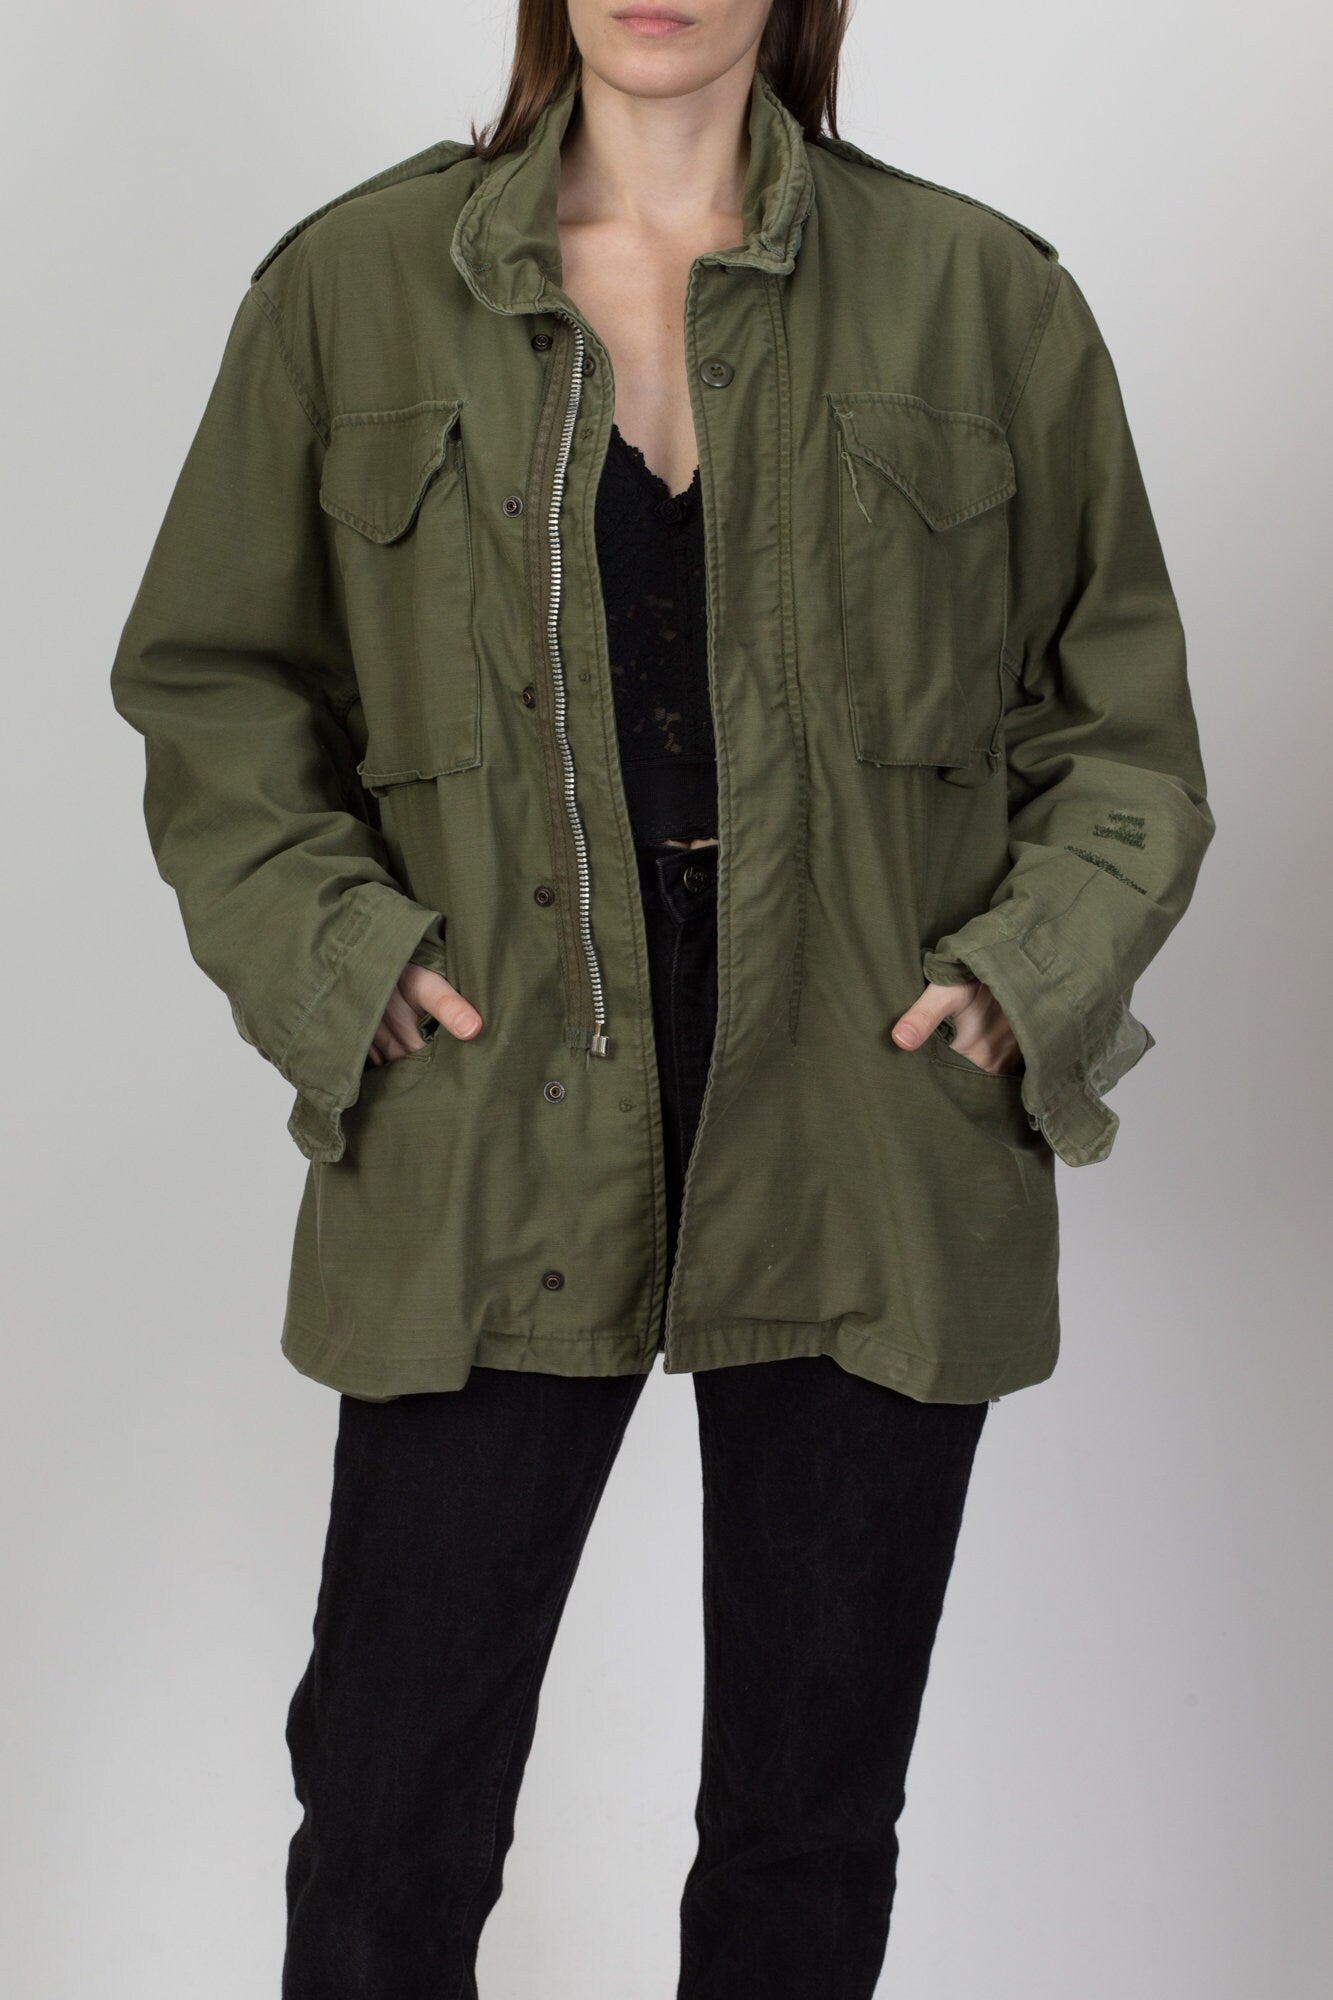 Levi's Army Green Hooded Military Jacket - Women, Best Price and Reviews